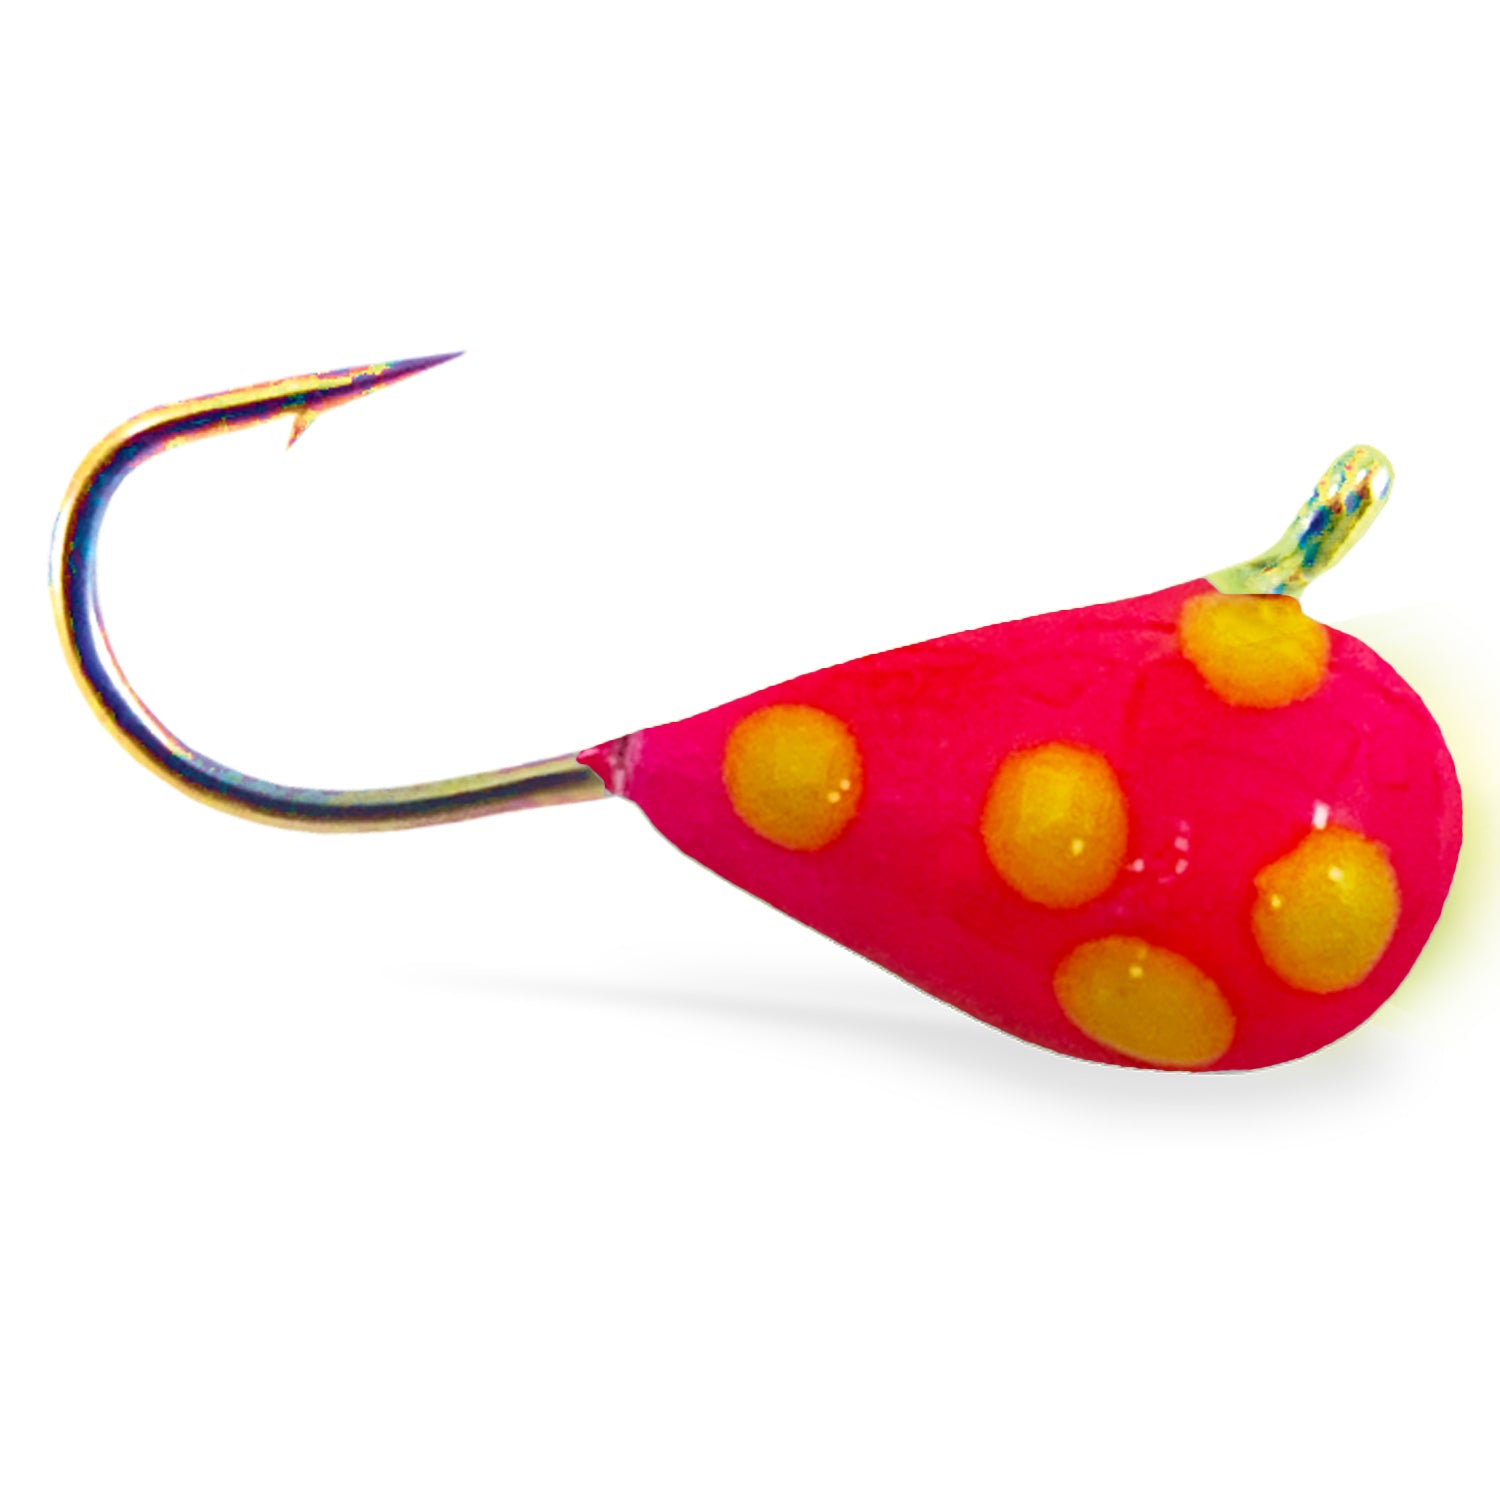 Pro Grade Tungsten Jig (2 Pack) - Acme Tackle Company